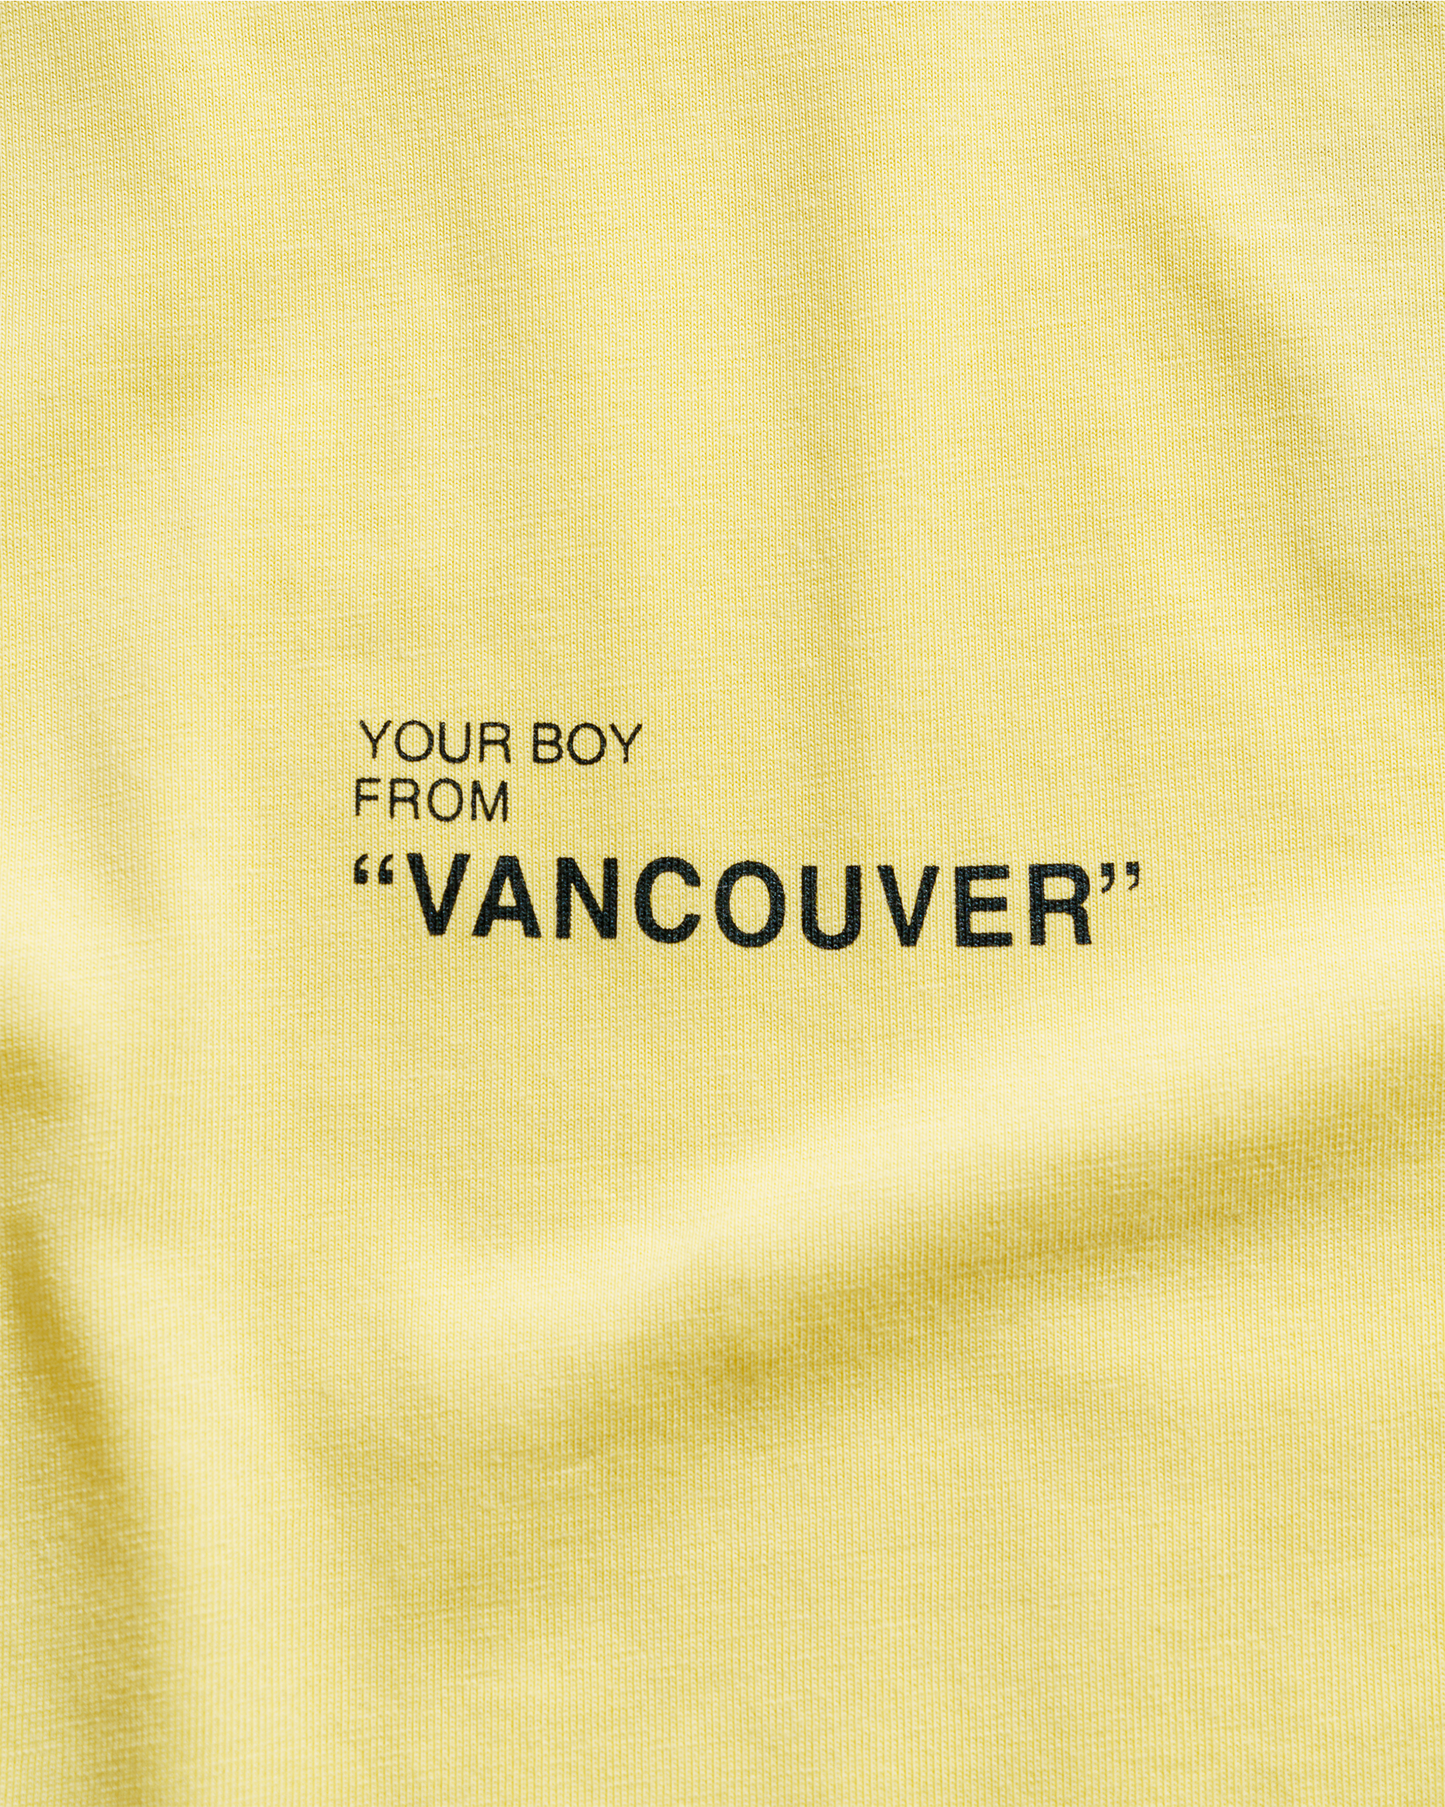 Your Boy from Vancouver T-shirt- Canary Yellow